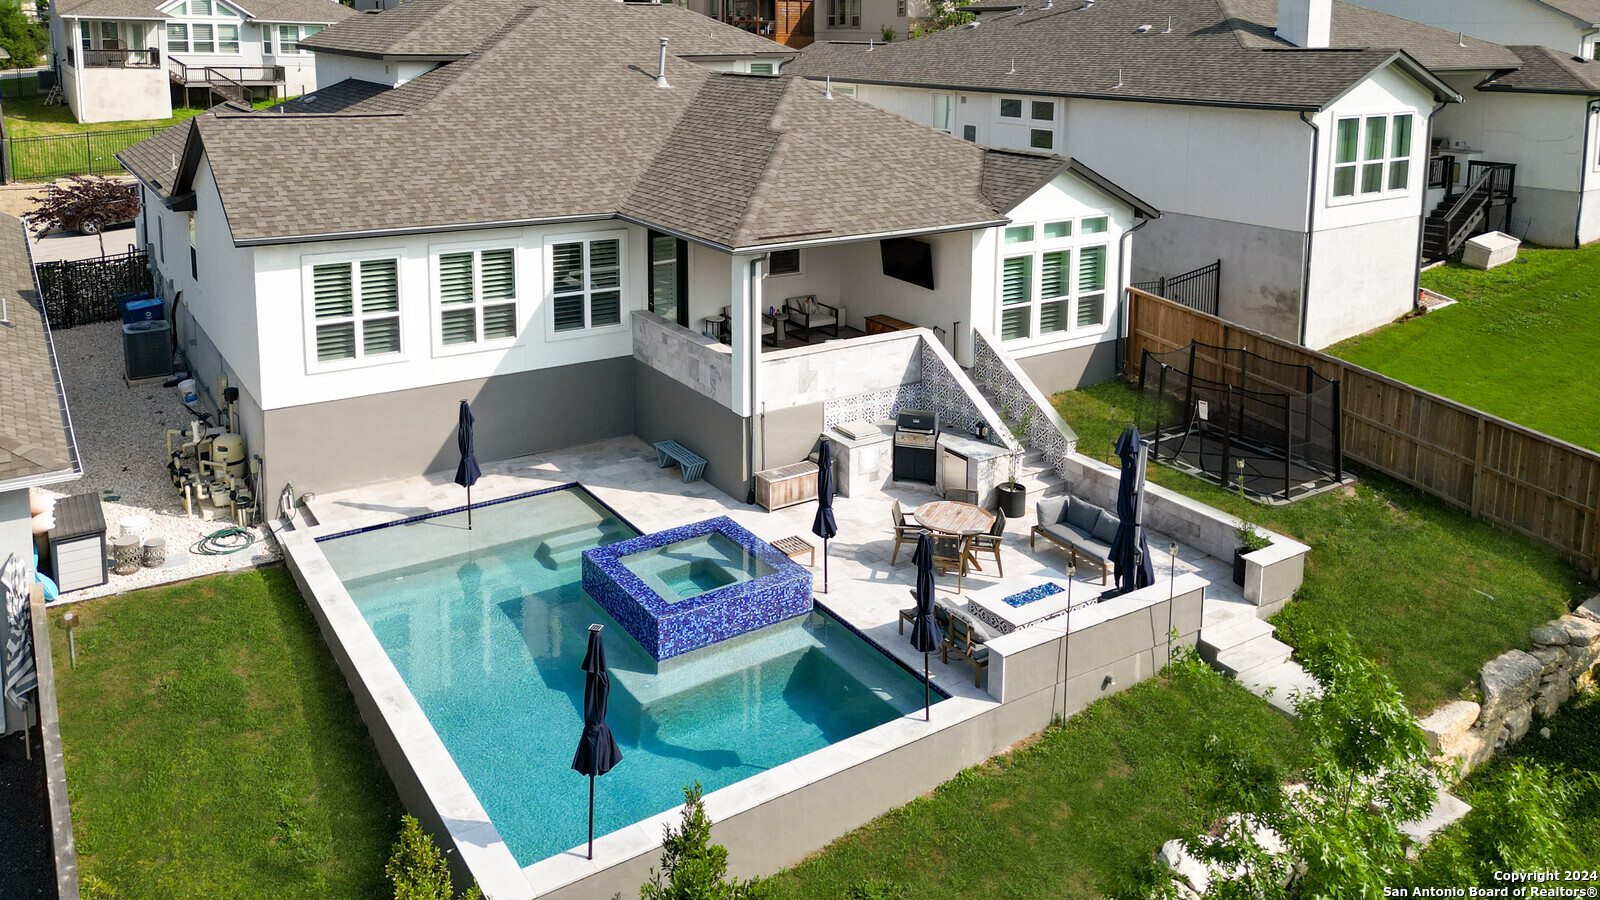 a aerial view of a house with swimming pool and porch